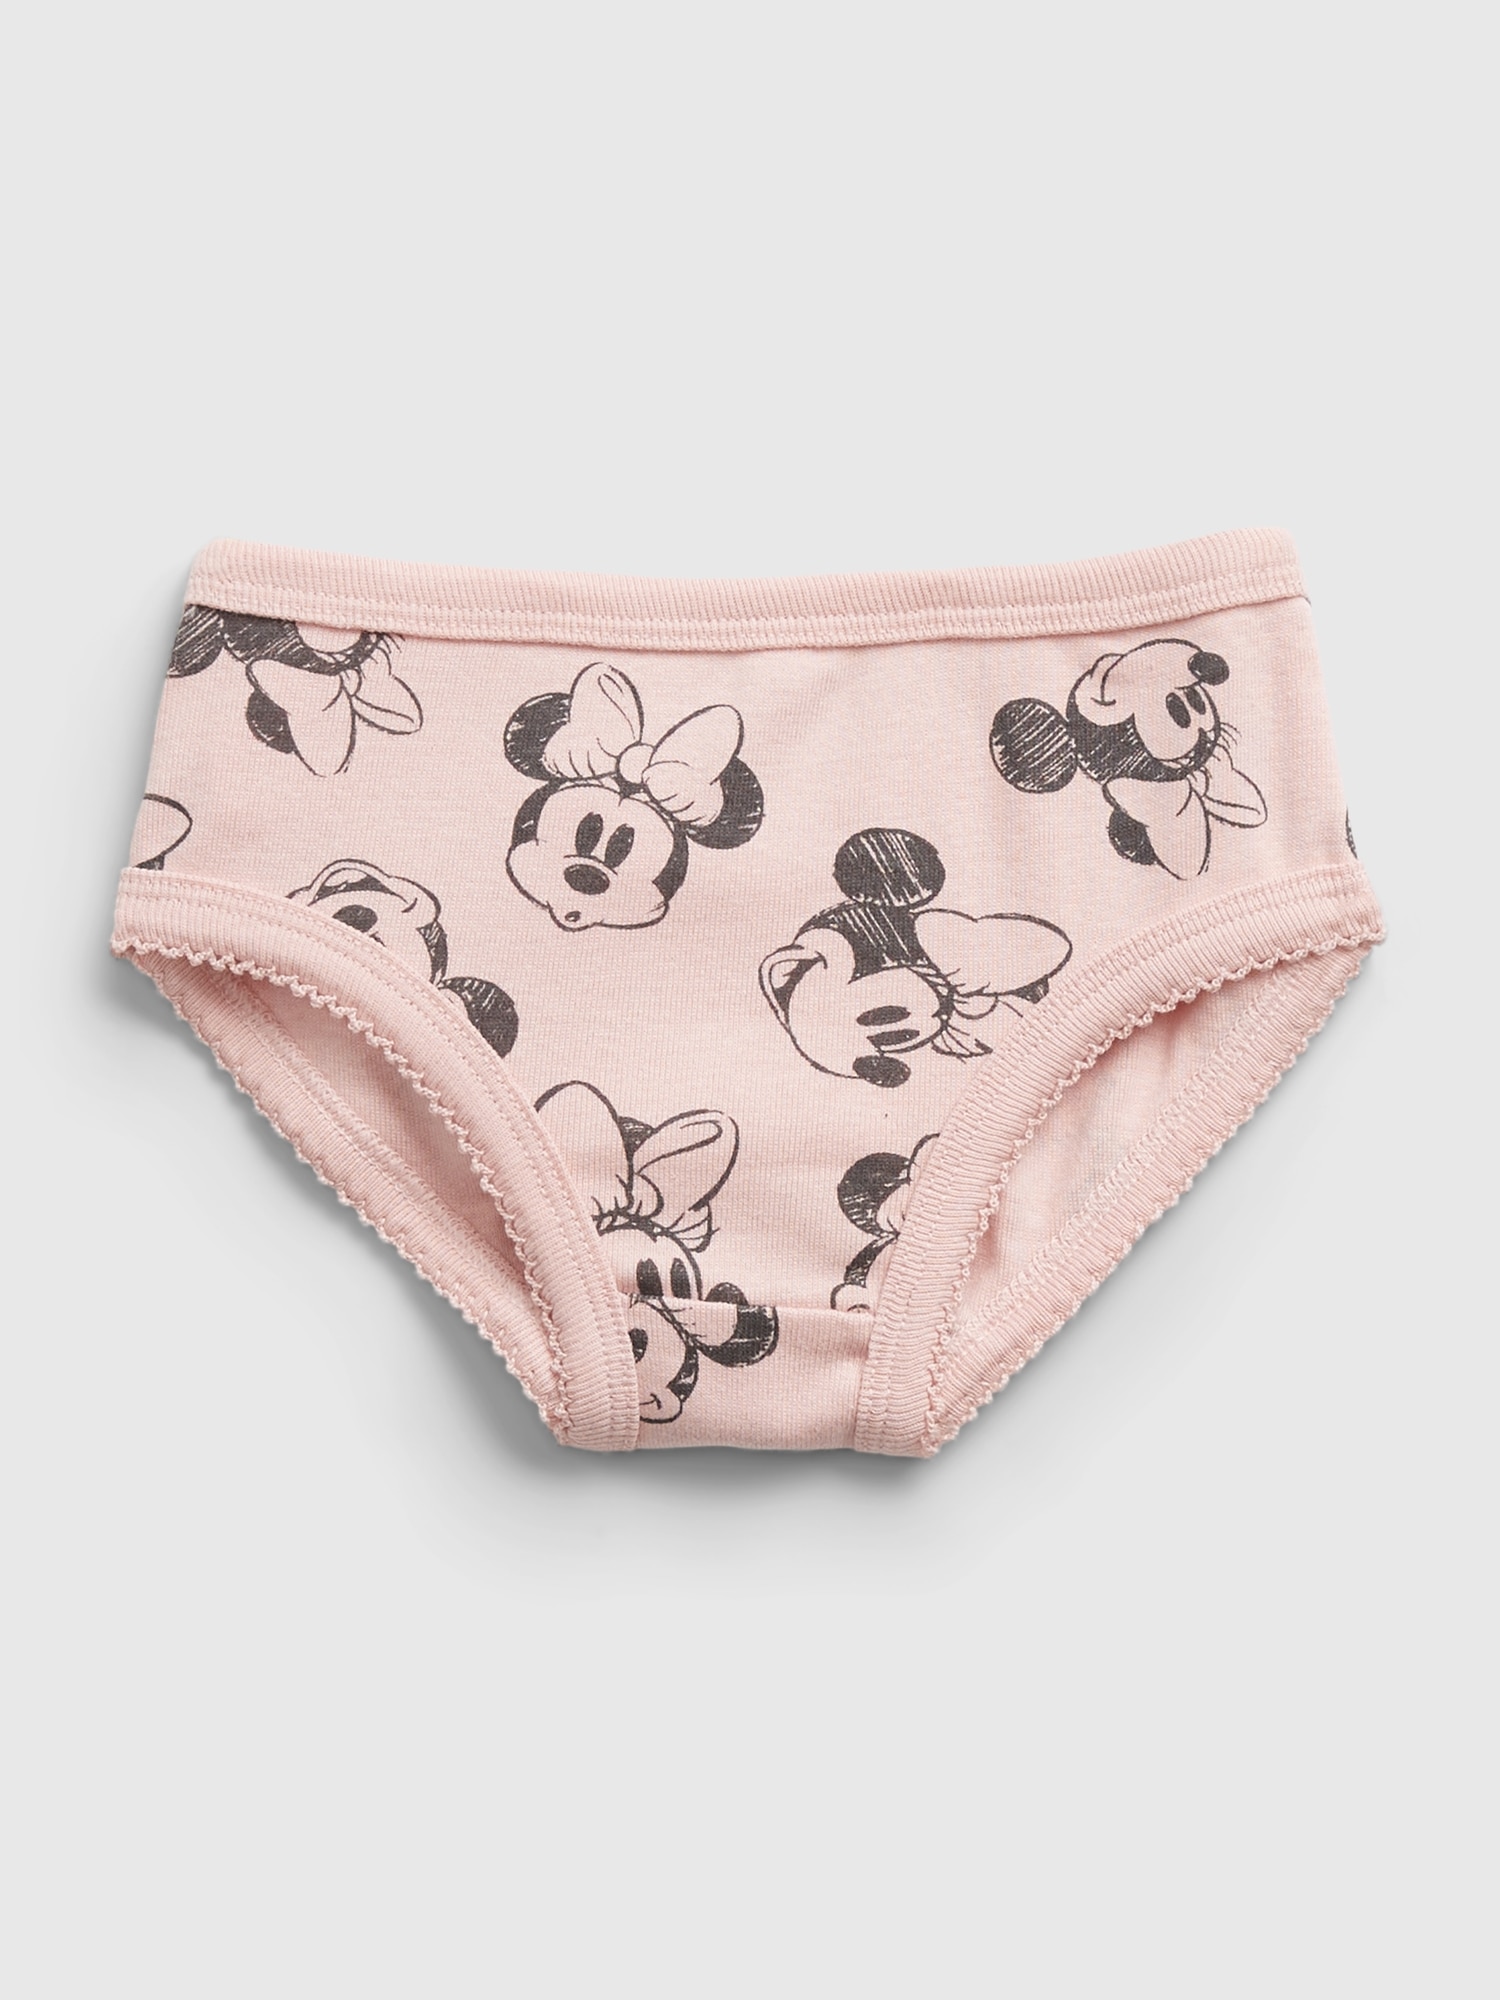 Disney's Mickey Mouse Clubhouse Minnie Mouse Toddler 7-pk. Briefs  Disney  mickey mouse clubhouse, Minnie mouse clubhouse, Mickey mouse clubhouse